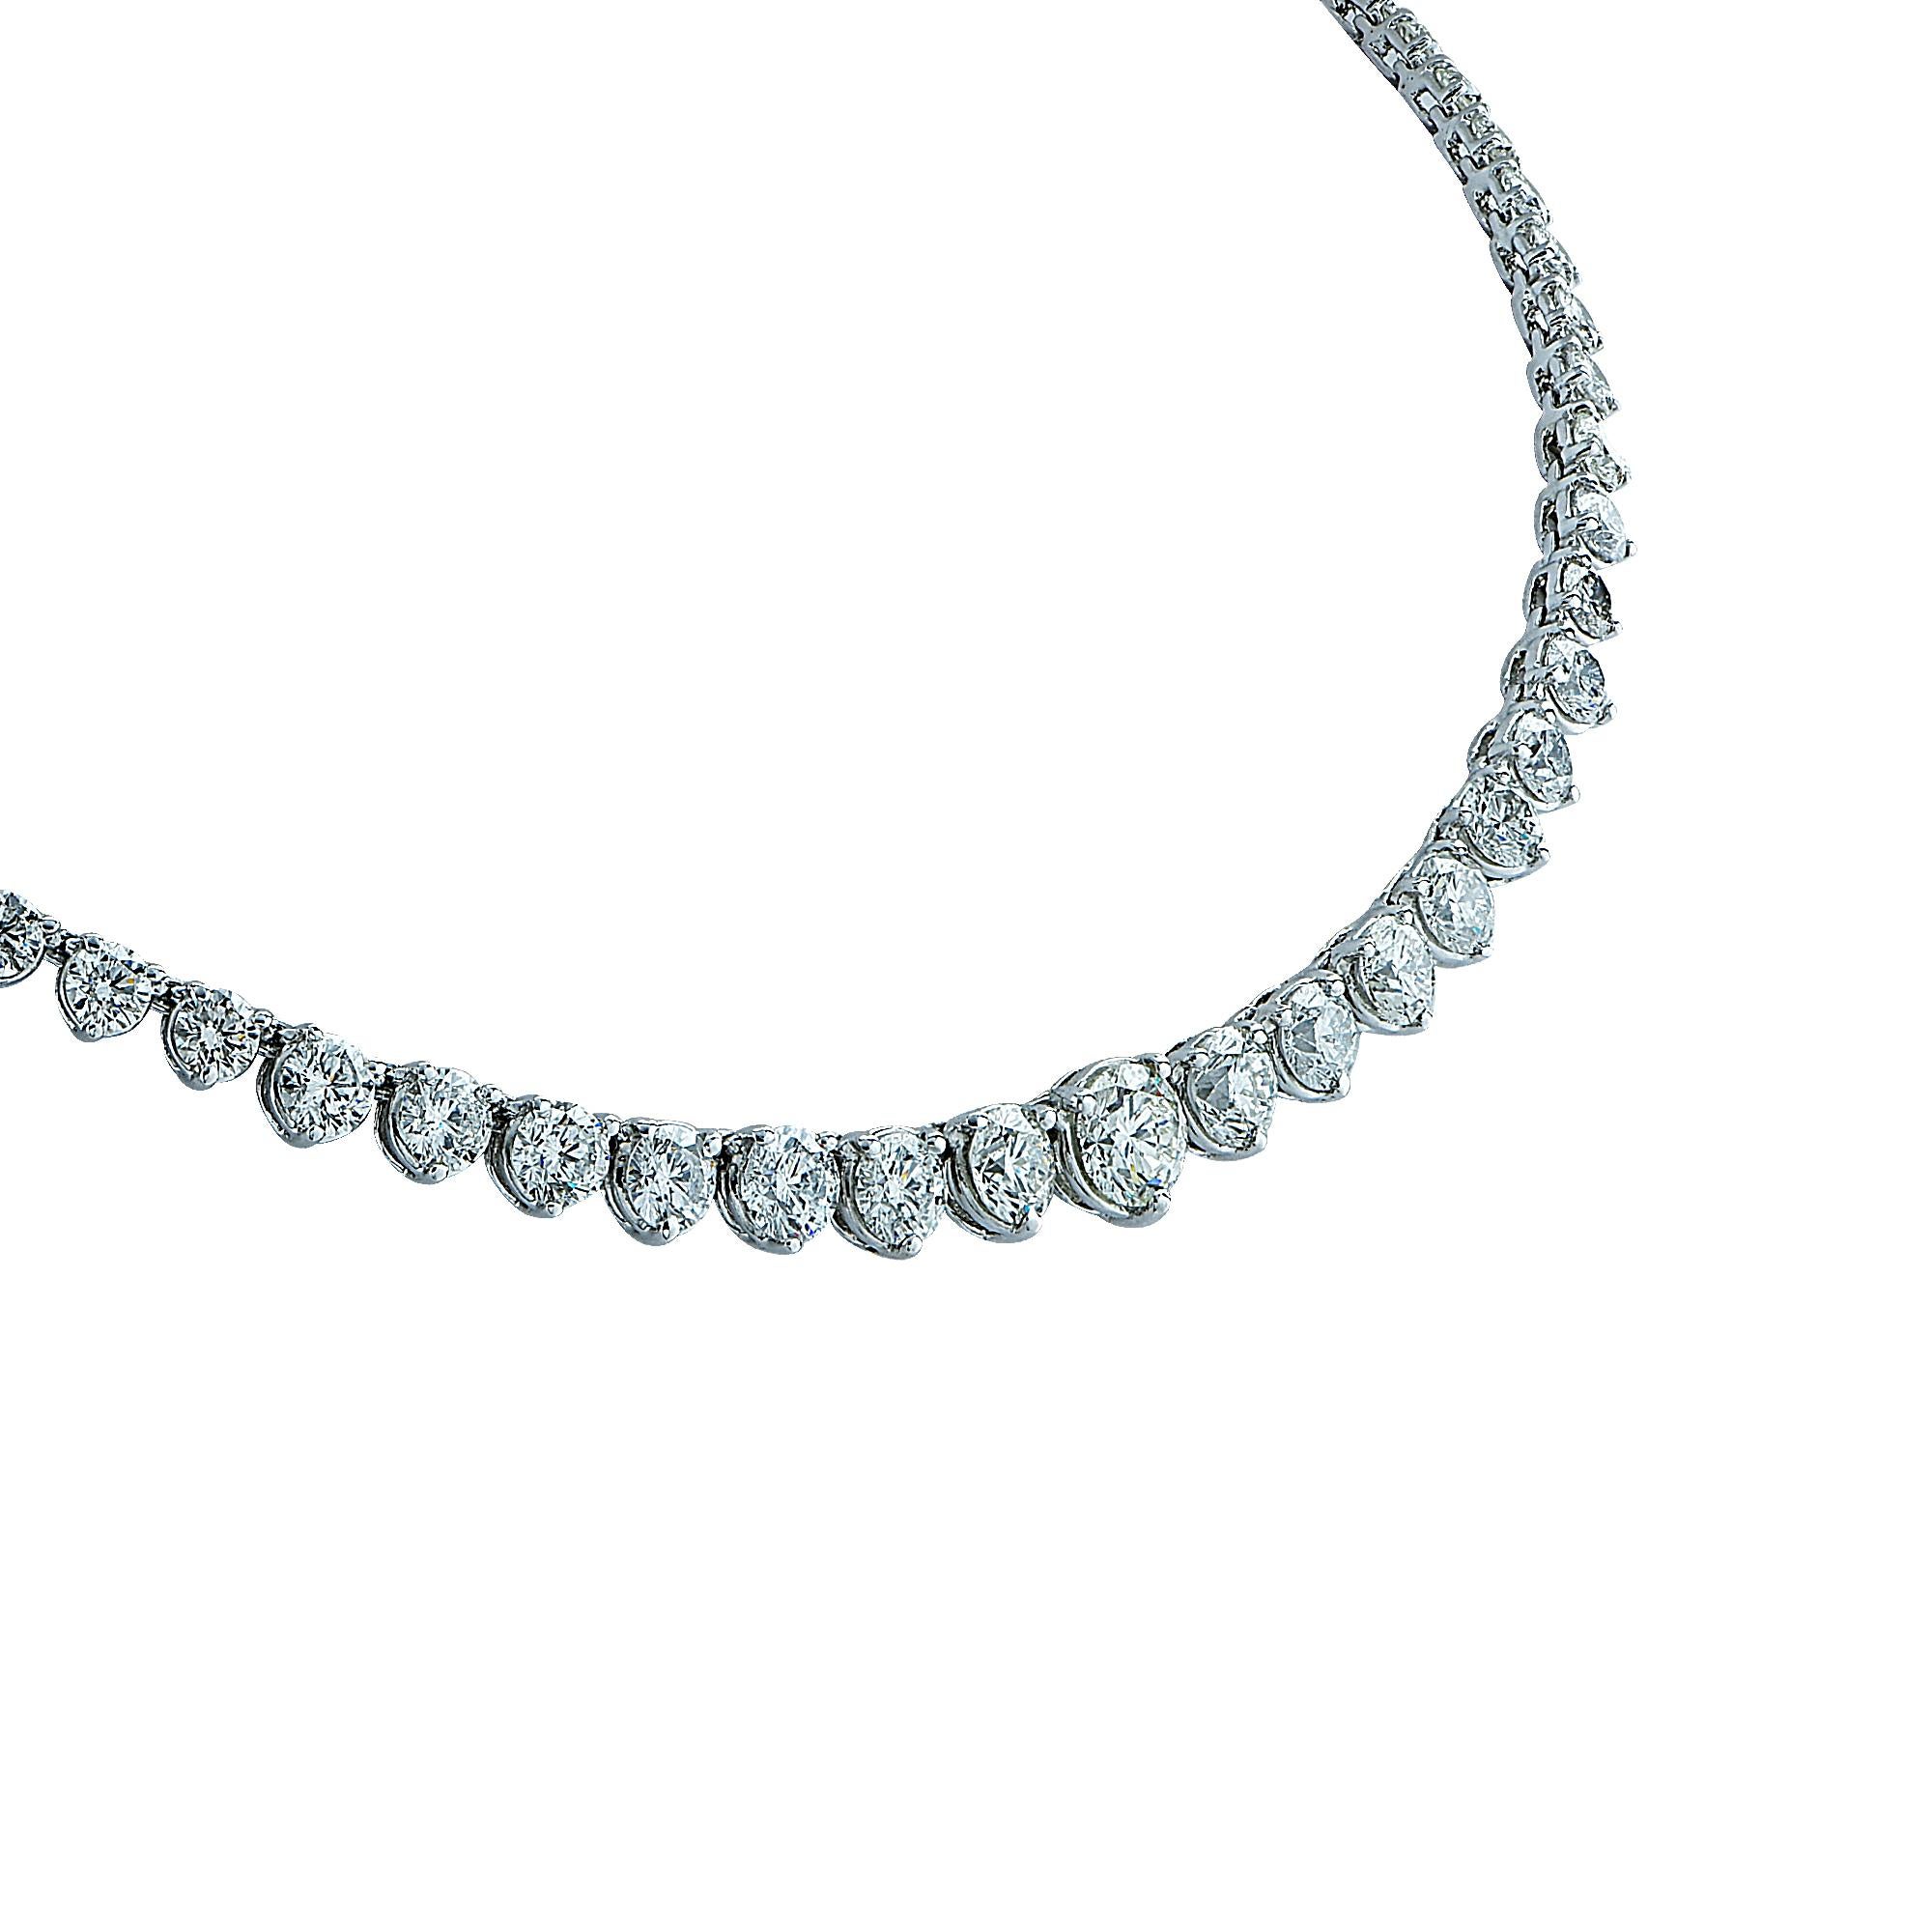 Platinum riviera necklace featuring approximately 16.70cts total of round brilliant cut diamonds G-H color SI1-2 clarity with a diamond clasp containing 4 marquise cut diamonds. The center diamond weighs approximately .92cts. This necklace measures